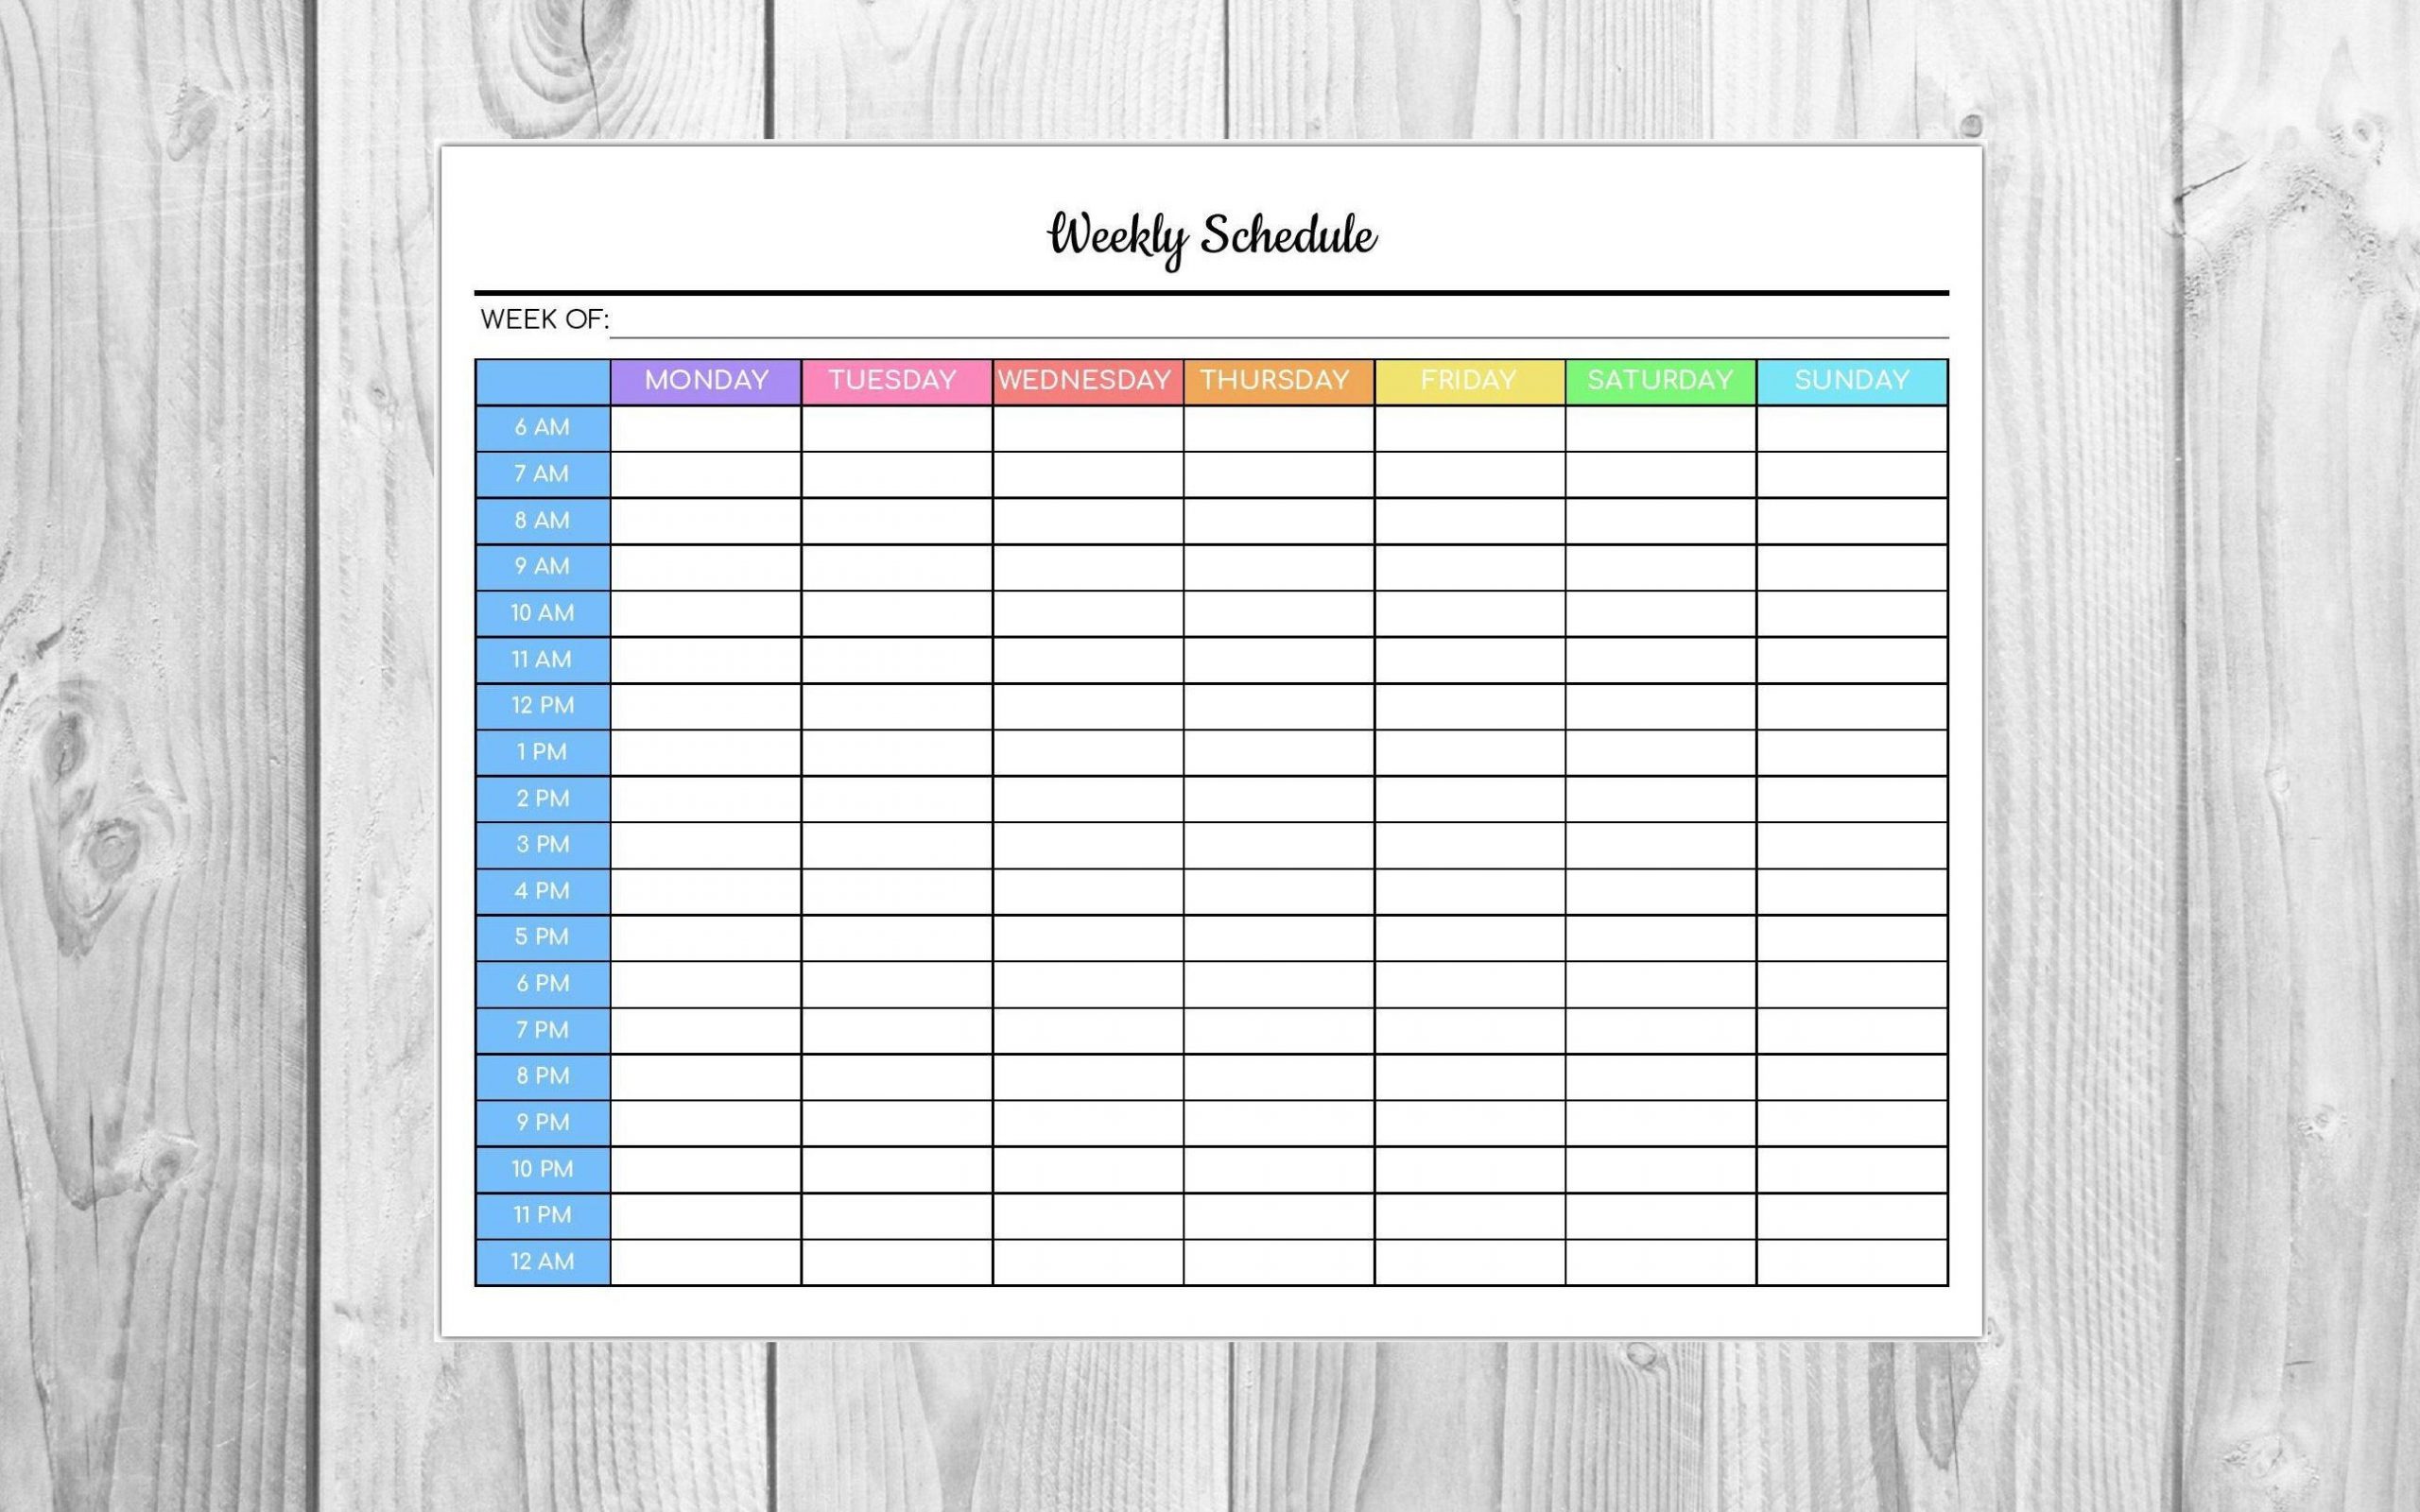 Weekly Schedule Editable Pdf Colorful Hourly Schedule